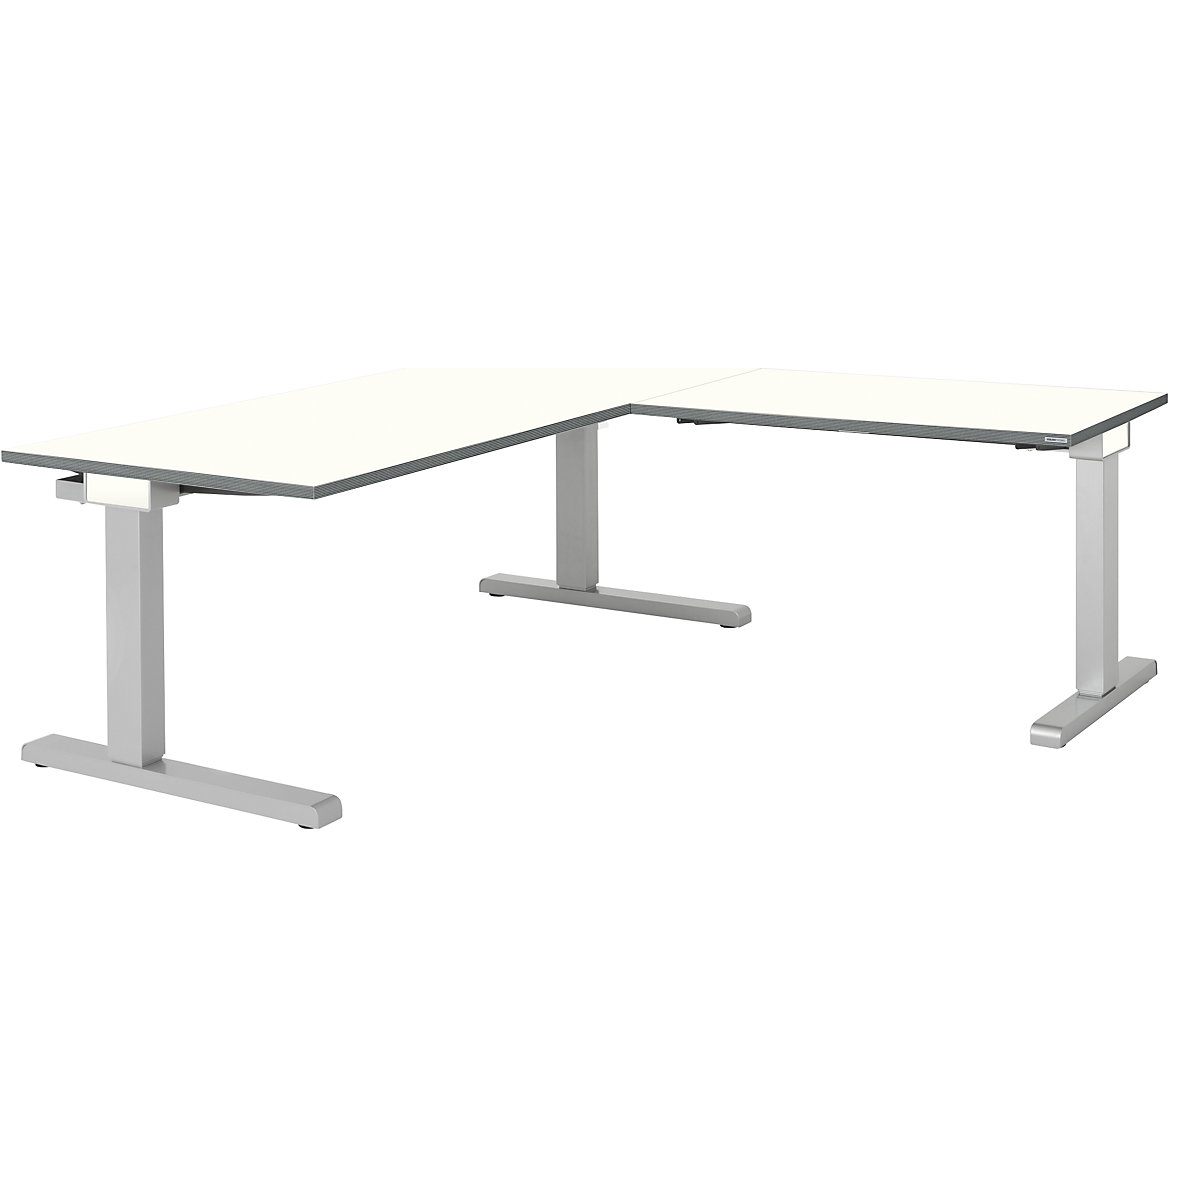 Desk, interlinked – mauser, WxD 1600 x 800 mm, angled extension on right (width 1000 mm), white top, white aluminium frame-3